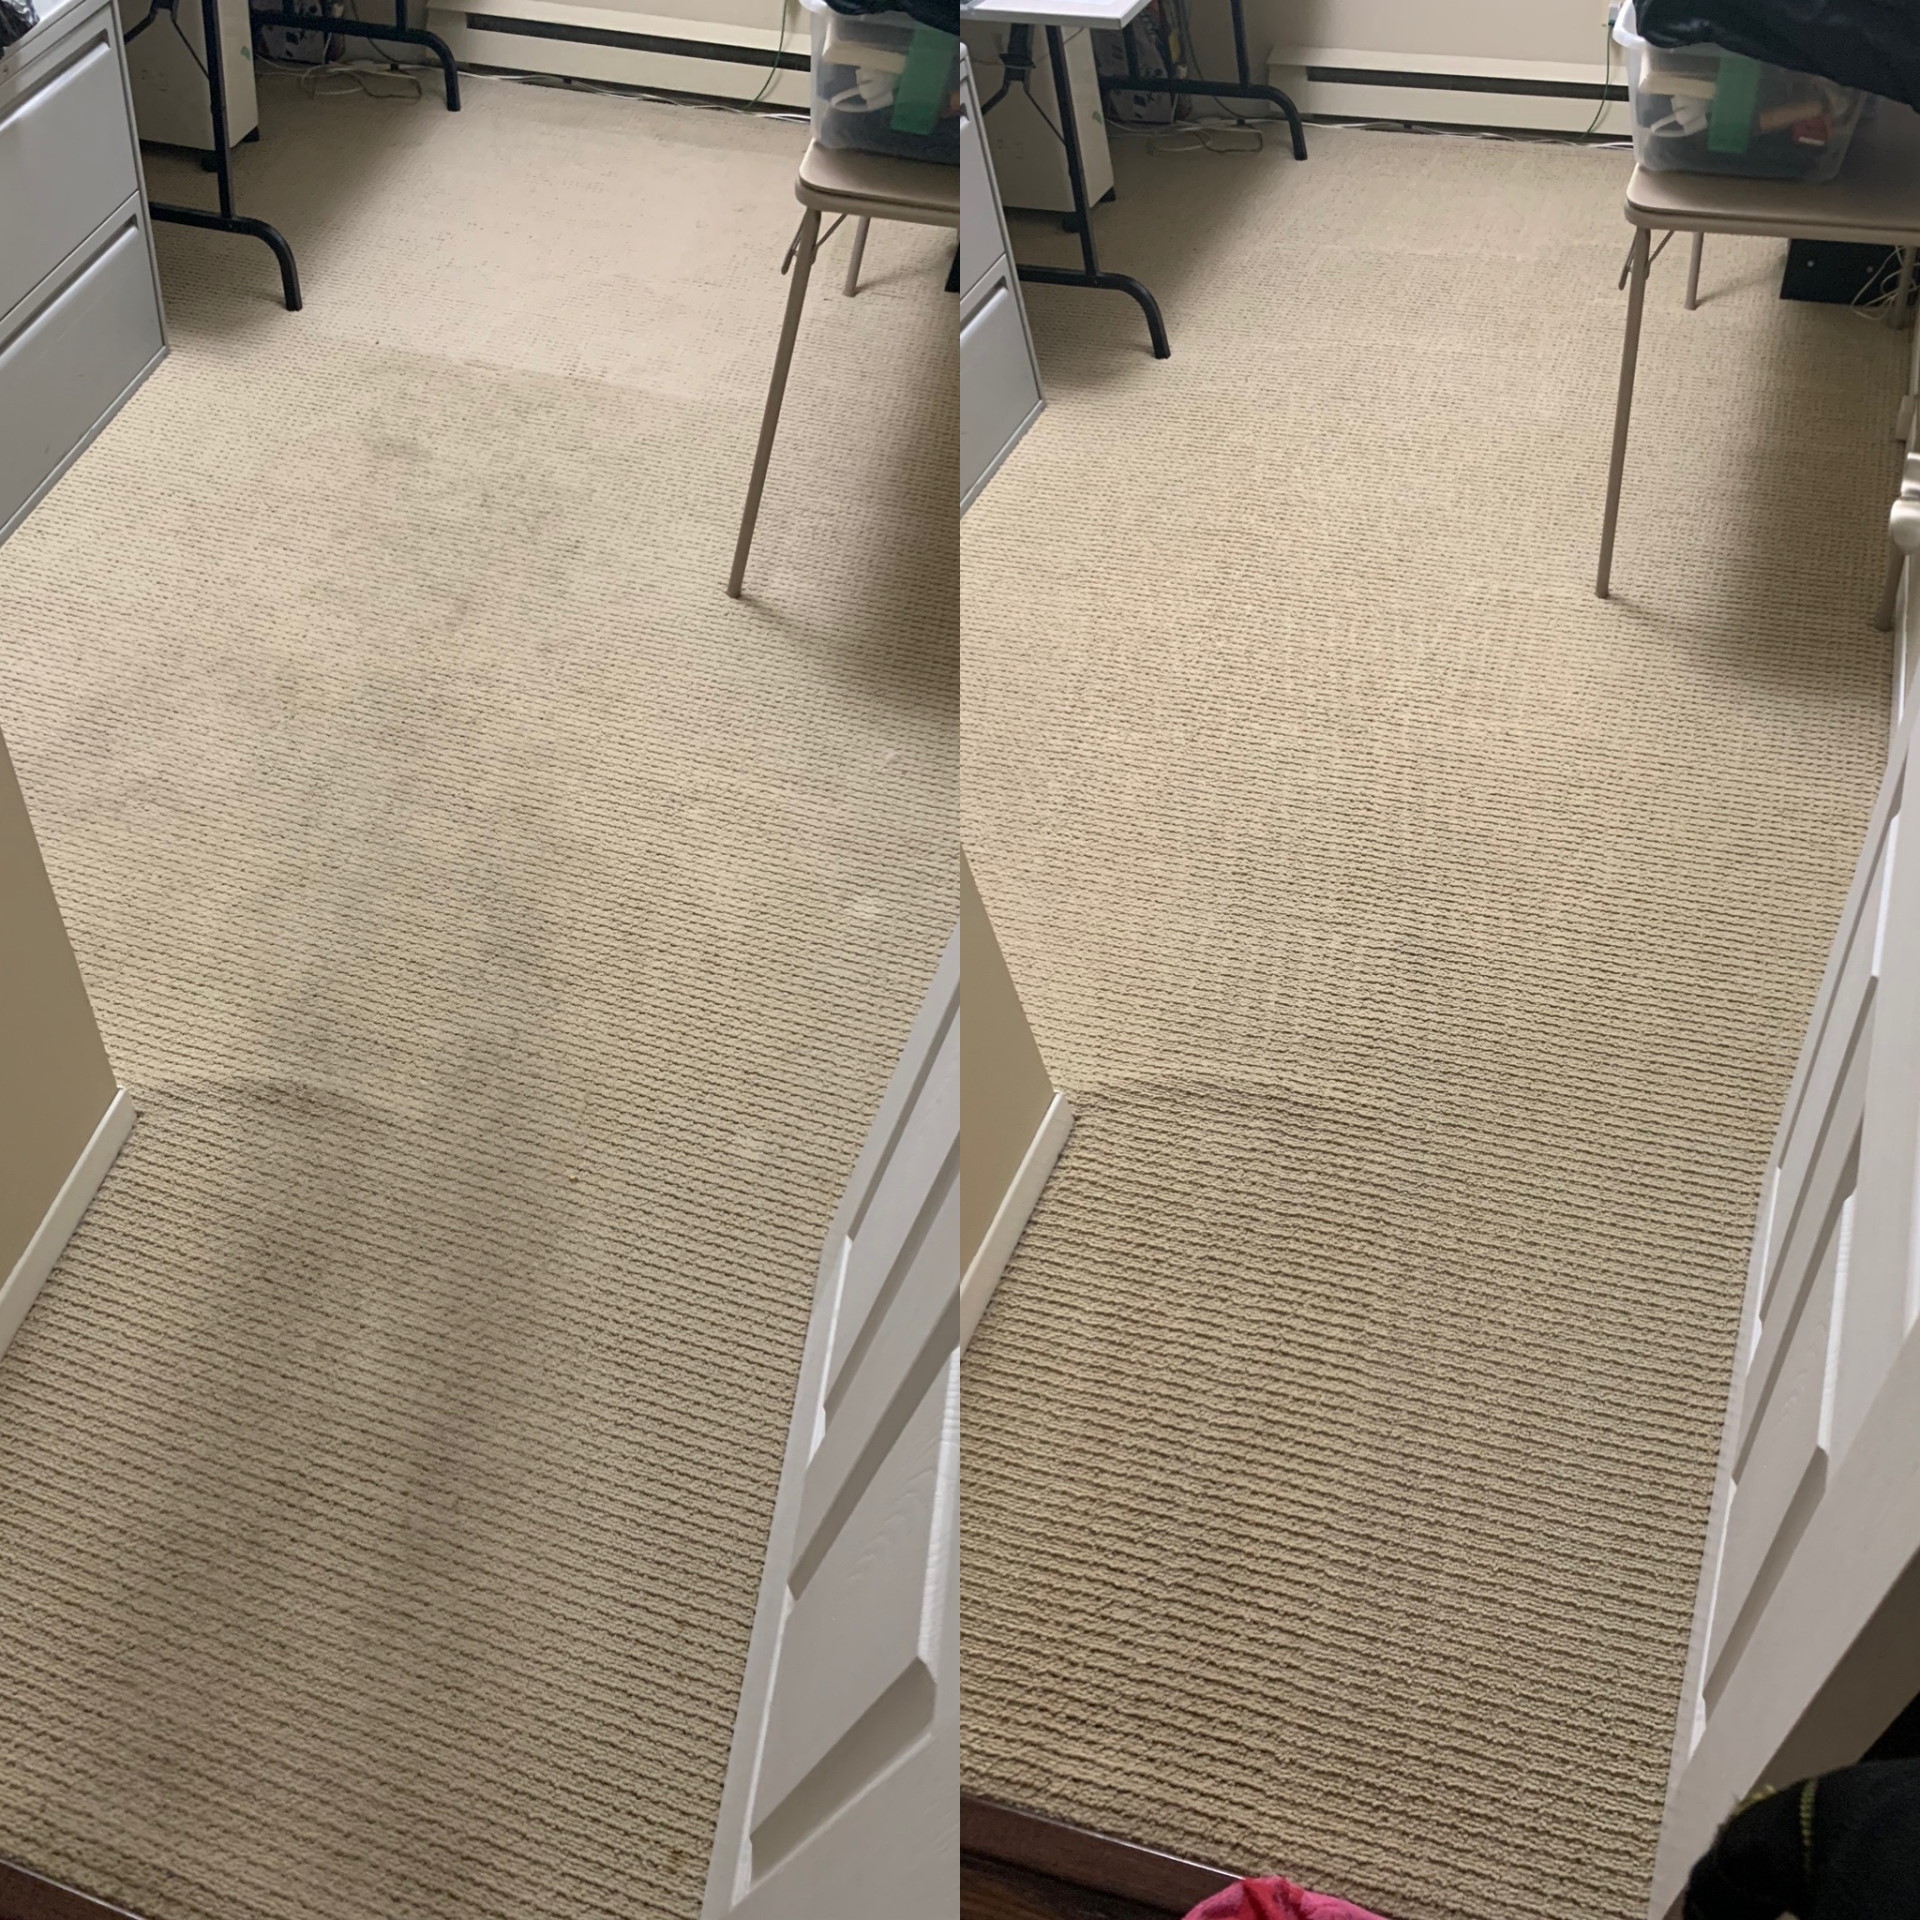 before and after pictures of a cleaned white carpet